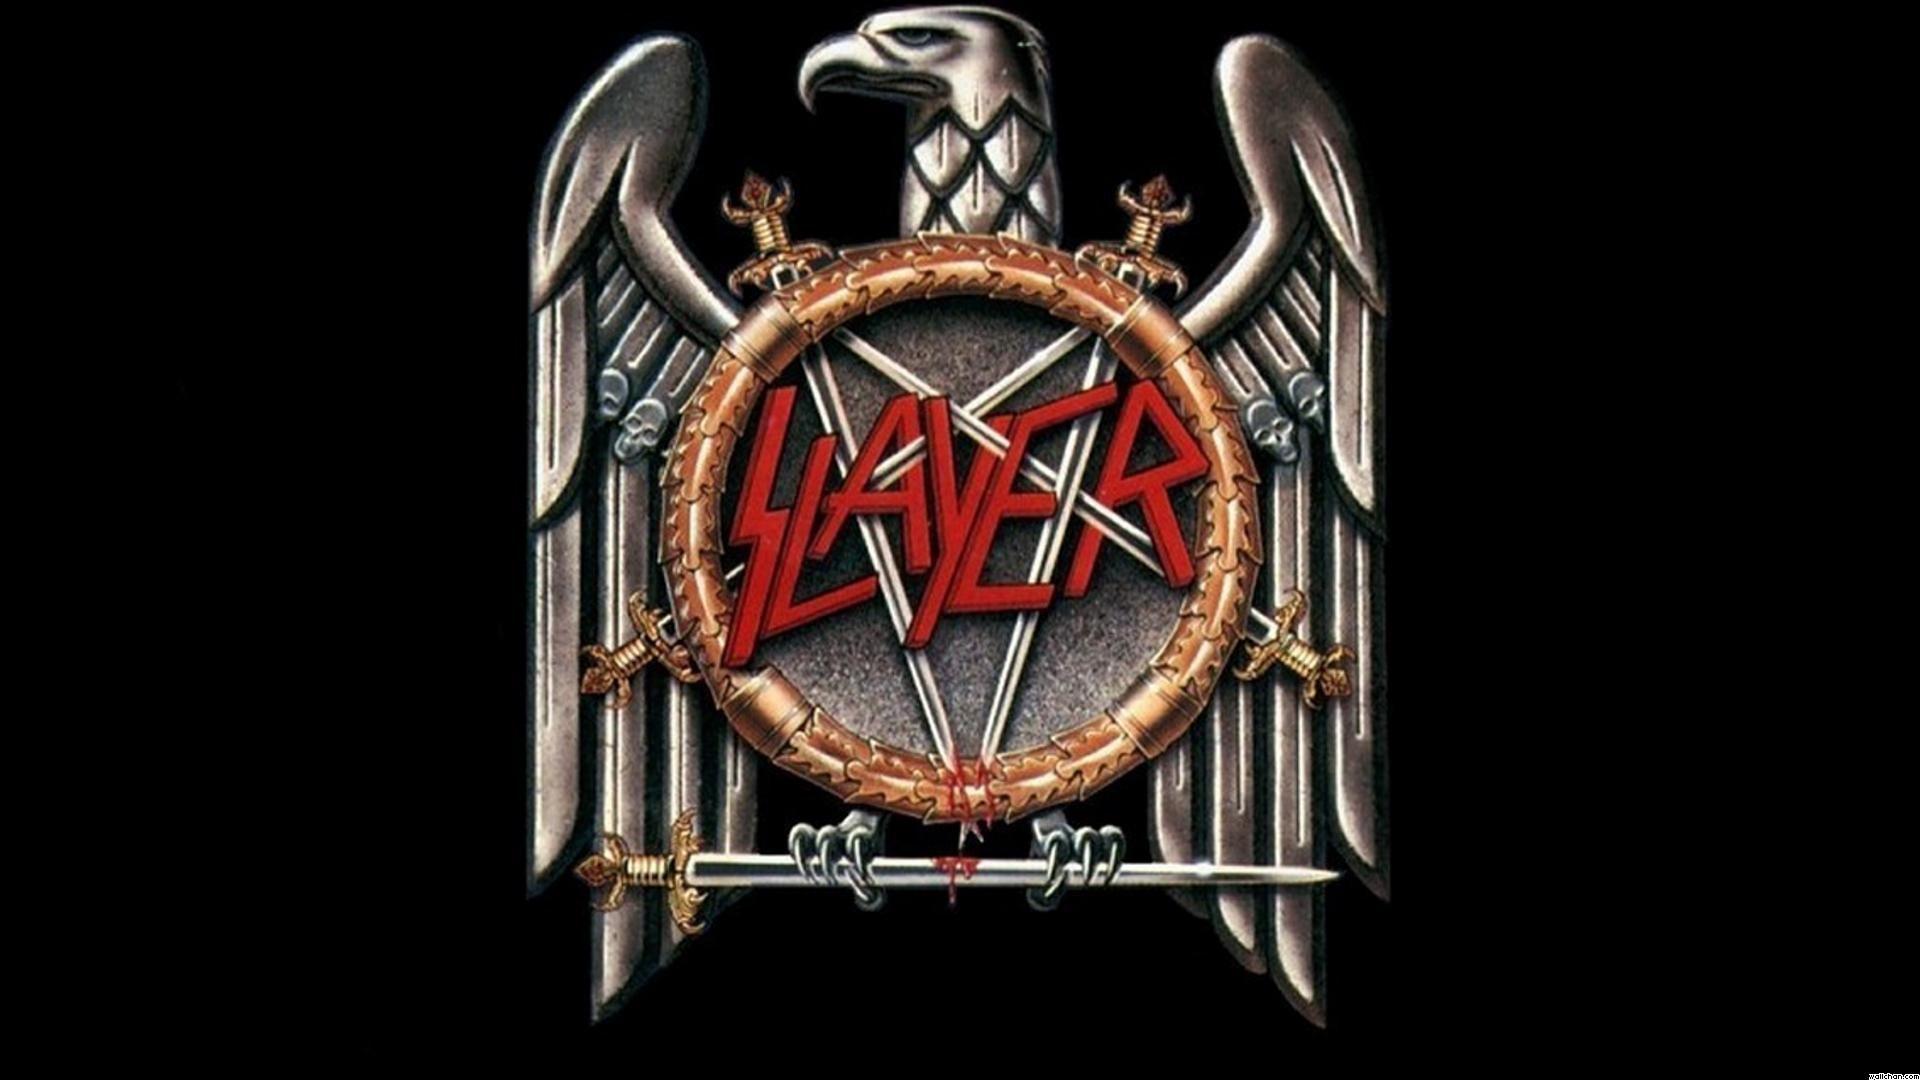 HD Slayer Groups Bands Music Heavy Metal Hard Rock Album Covers